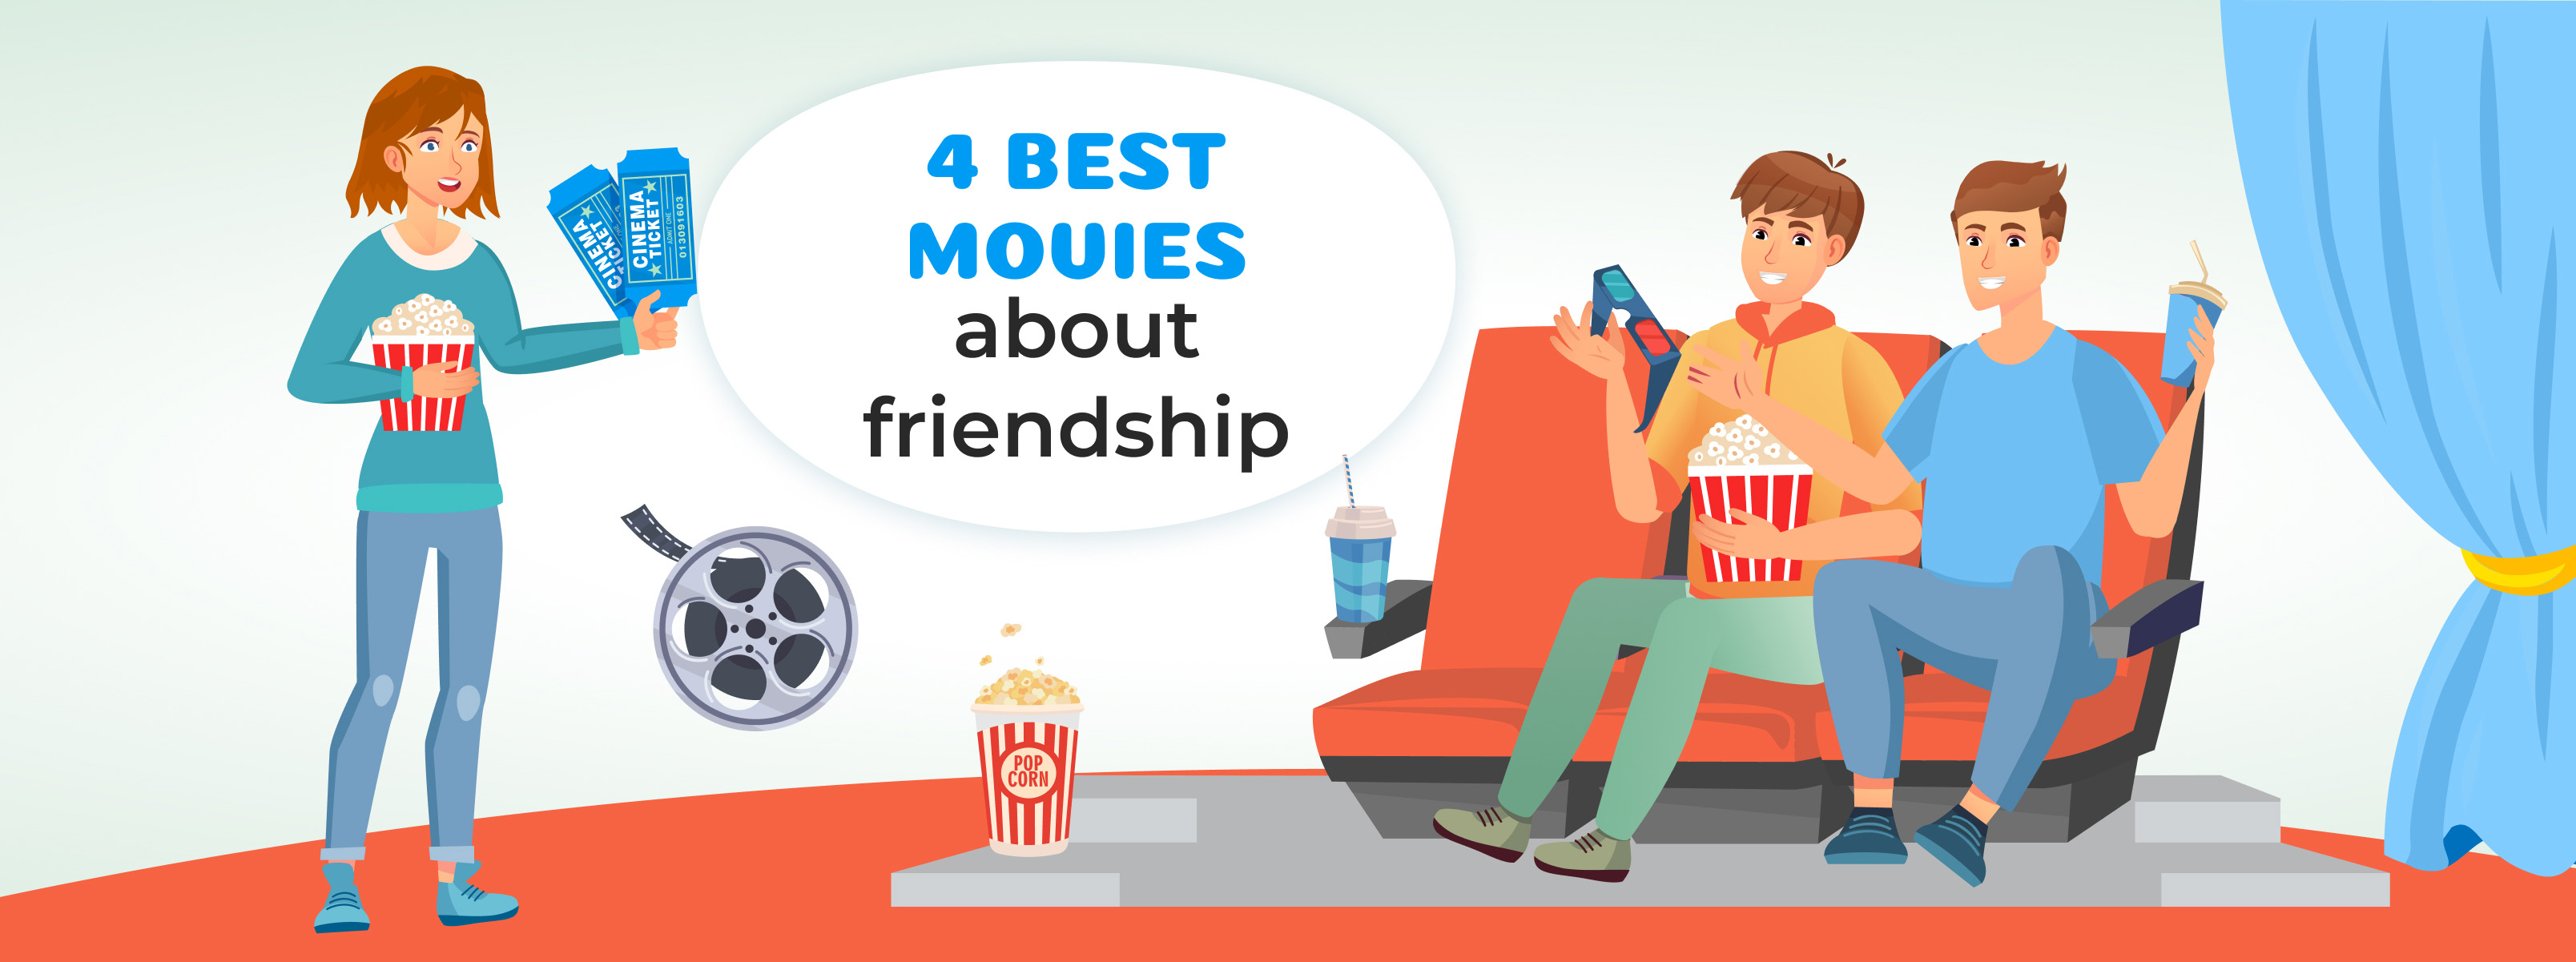 Top 4 movies about friends in honor of the International Friendship Day